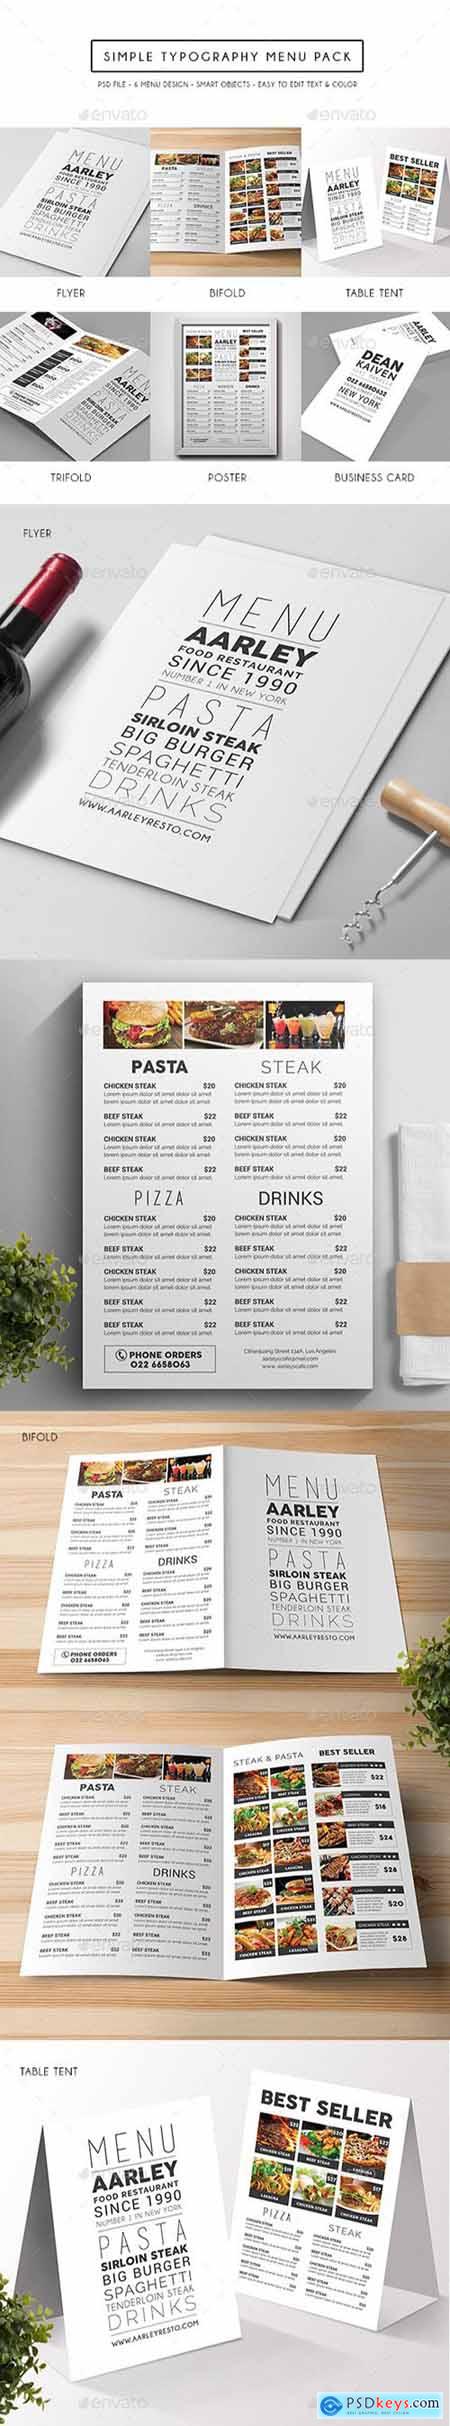 Graphicriver Simple Typography Menu Pack